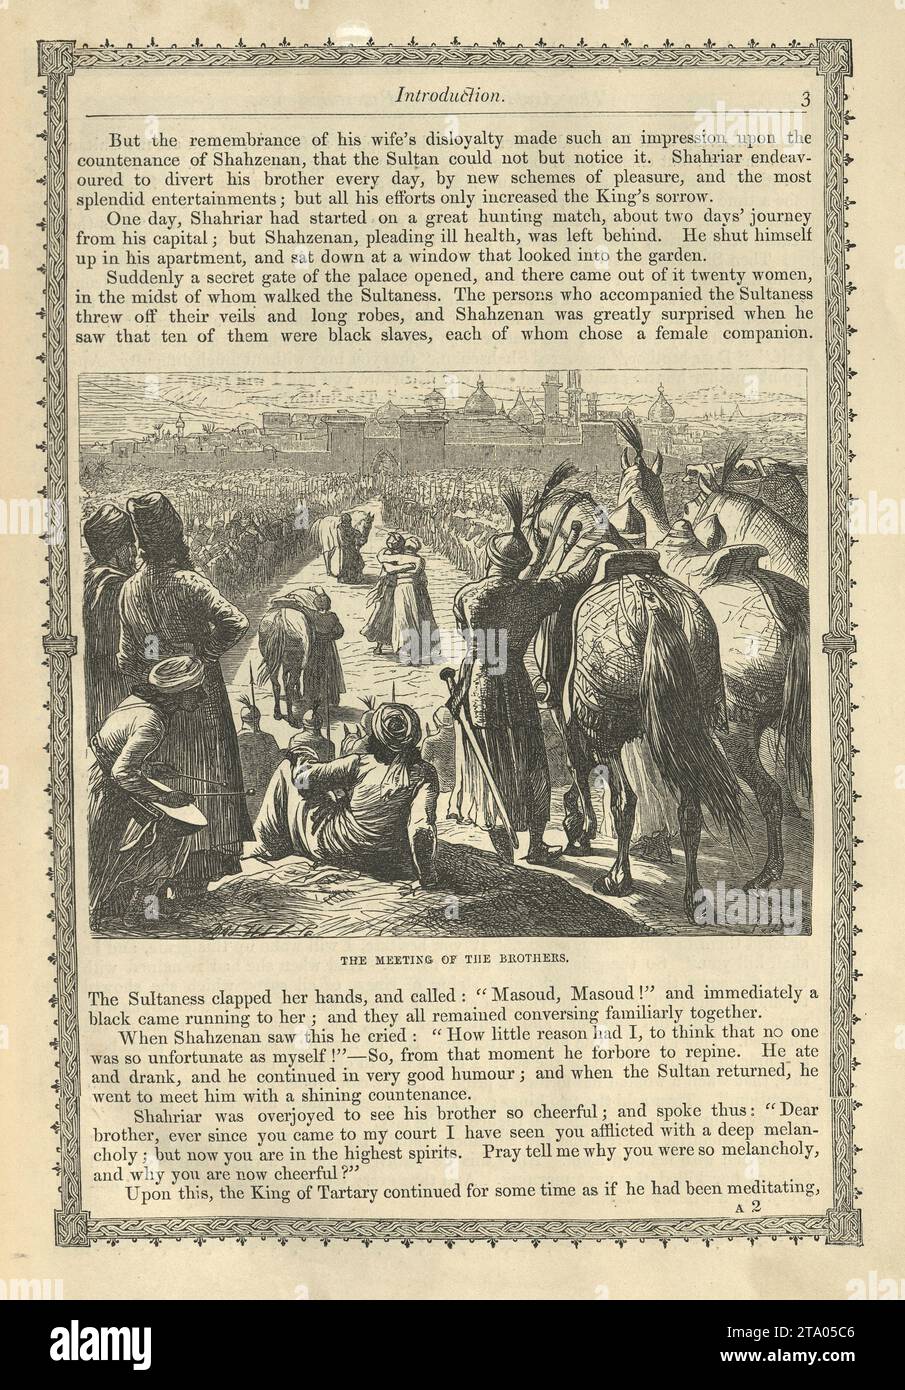 Vintage illustration One Thousand and One Nights, Meeting of the brothers, Middle Eastern folktales, by The Brothers Dalziel Stock Photo